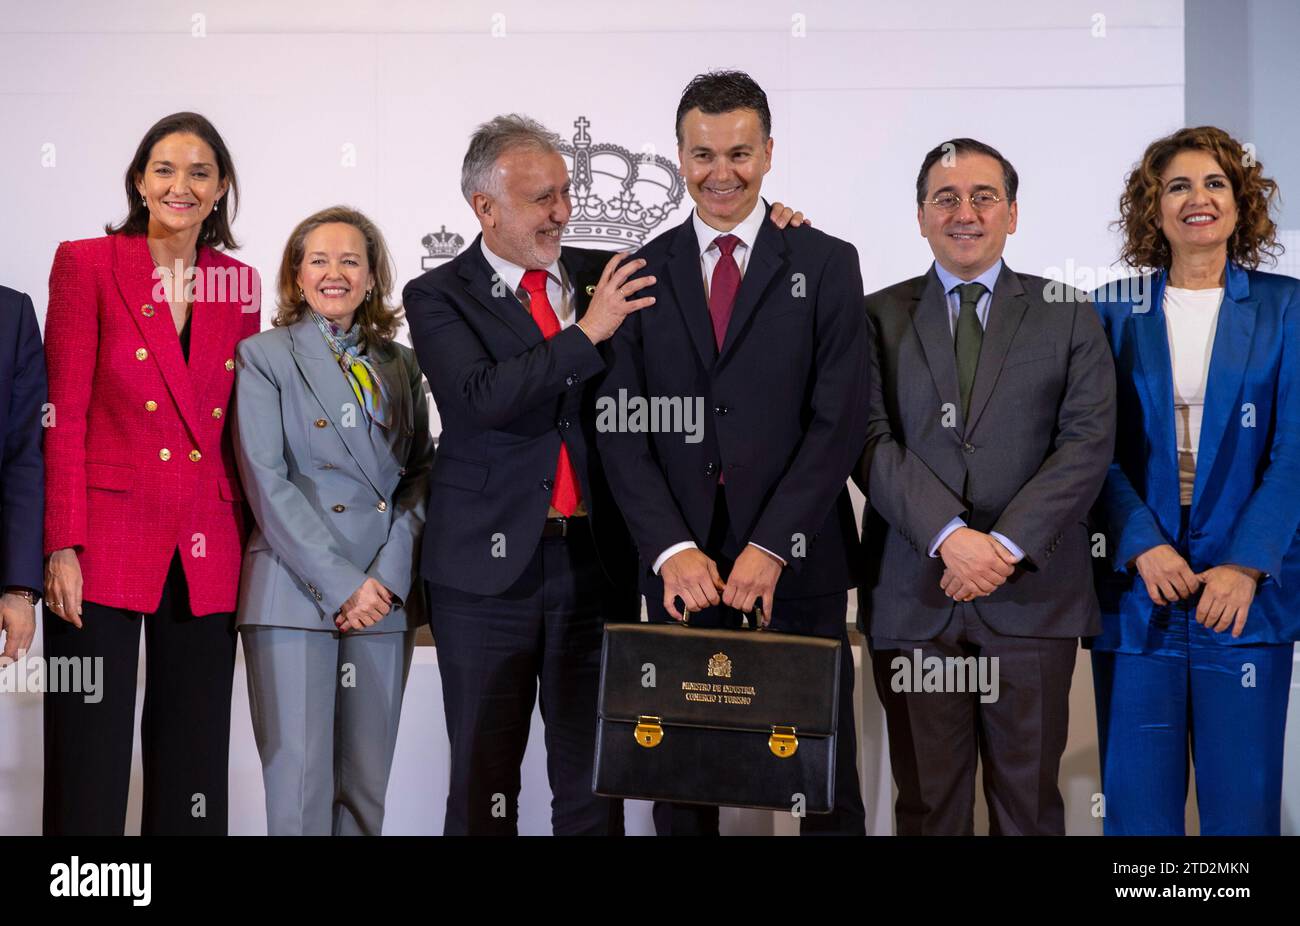 Madrid, 03/28/2023. Inauguration of Héctor Gómez as the new Minister of Industry, Commerce and Tourism. In the image, Ángel Victor Torres, president of the Canary Islands, Reyes Maroto, Nadia Calviño, José Manuel Albares and María Jesús Montero, Photo: Ignacio Gil. ARCHDC. Credit: Album / Archivo ABC / Ignacio Gil Stock Photo